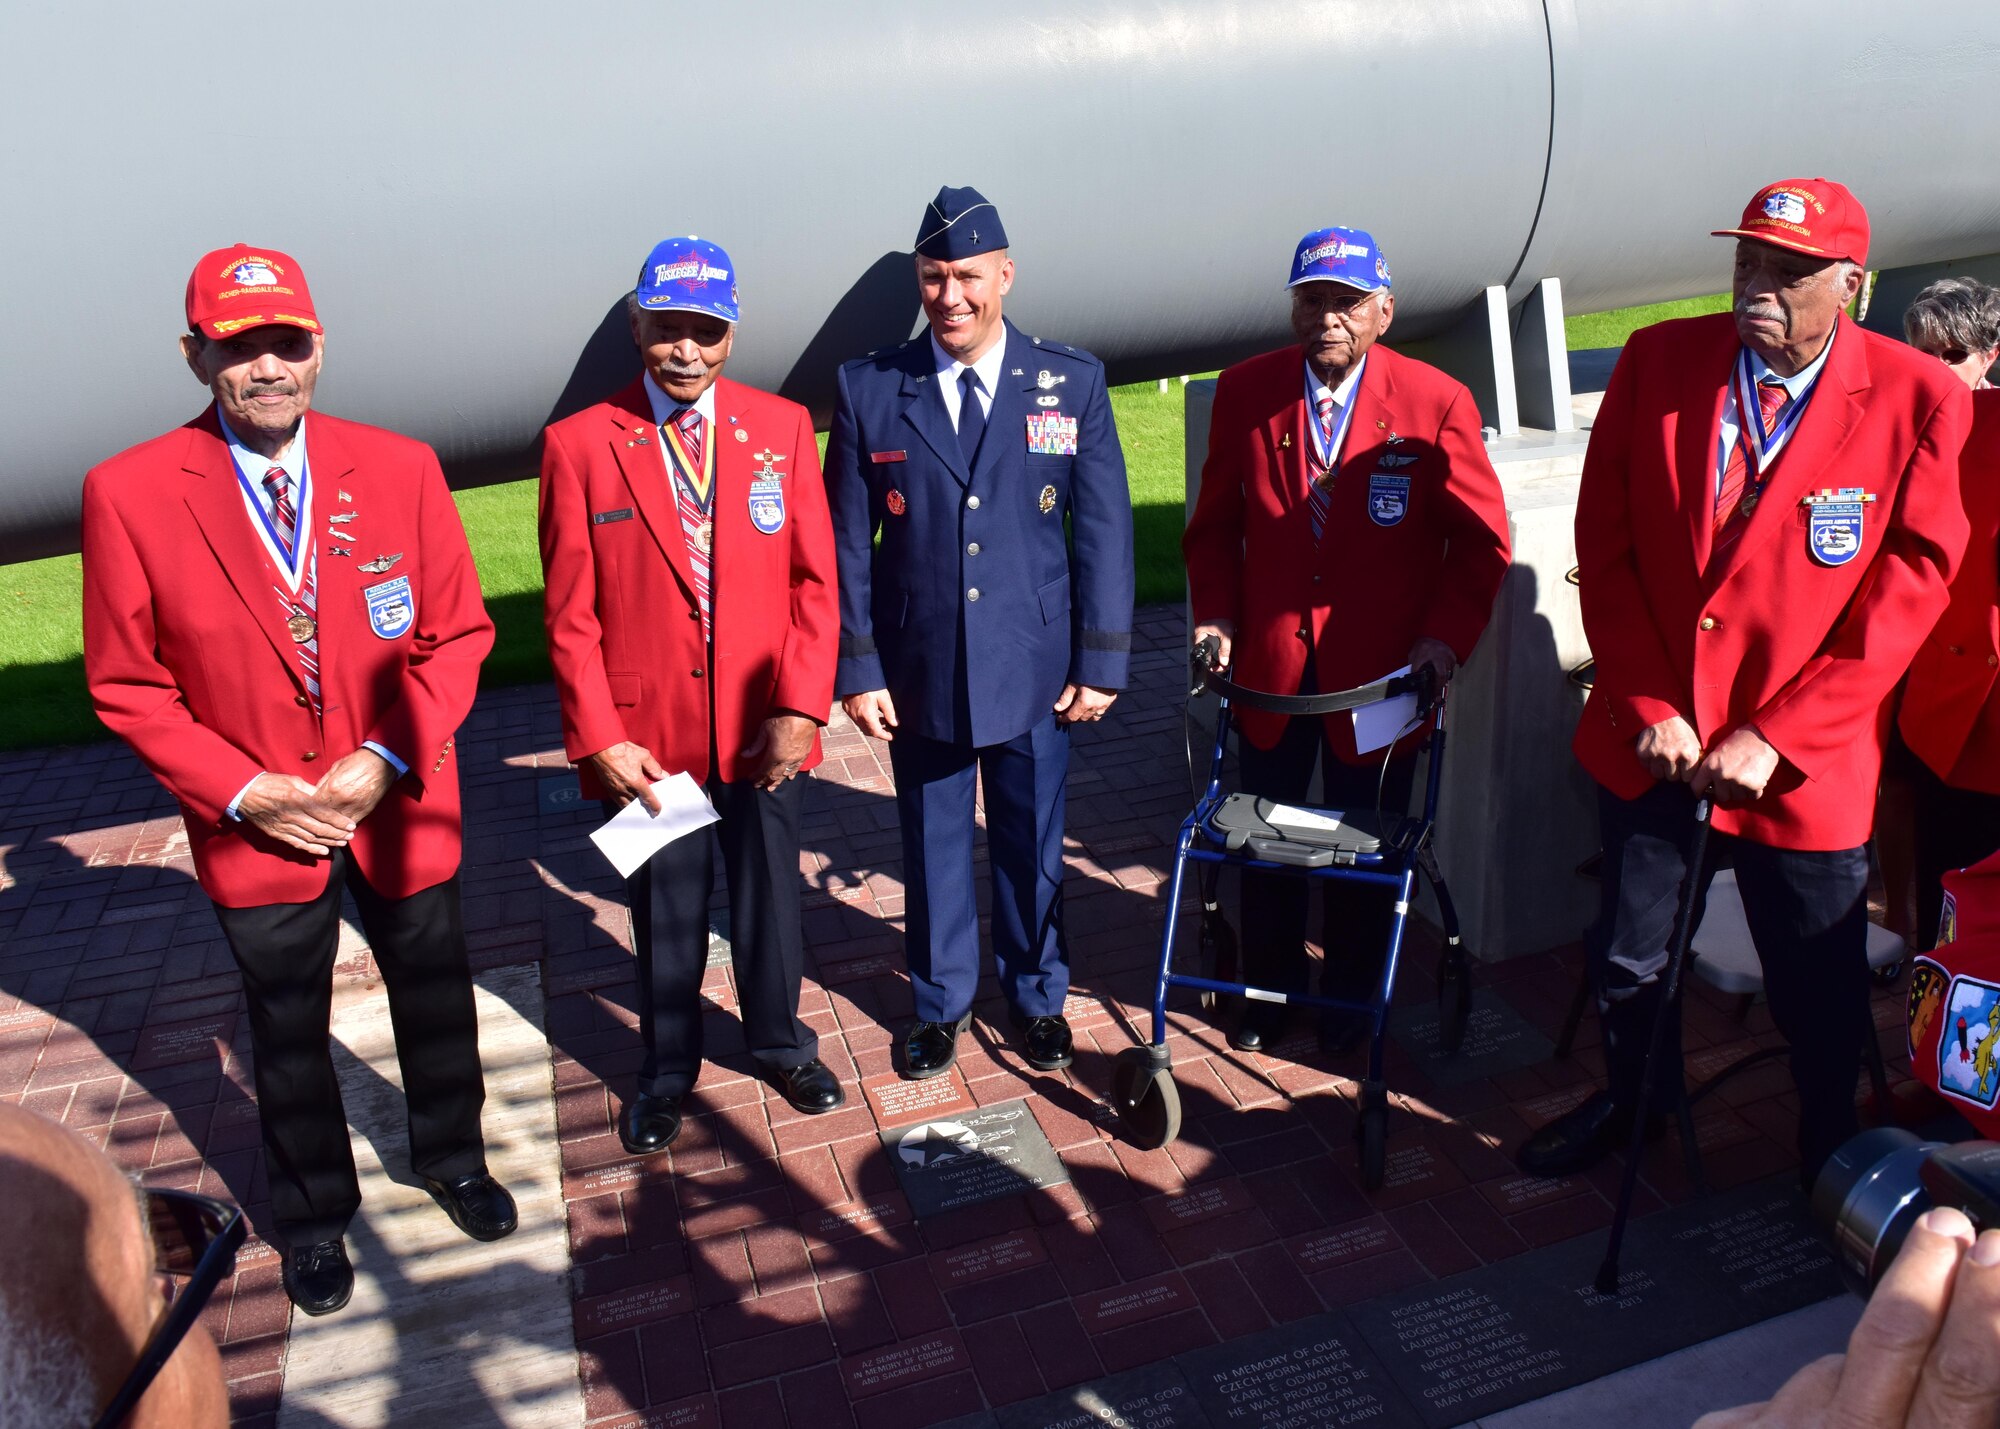 Brig. Gen. Brook Leonard, 56th Fighter Wing commander, stands with original Tuskegee Airmen, Nov. 11 during a ceremony unveiling a red tail granite paver, honoring Tuskegee Airmen experience at the Wesley Bolin Plaza, Phoenix, Arizona. (U.S. Air Force photo by Tech. Sgt. Louis Vega Jr.)